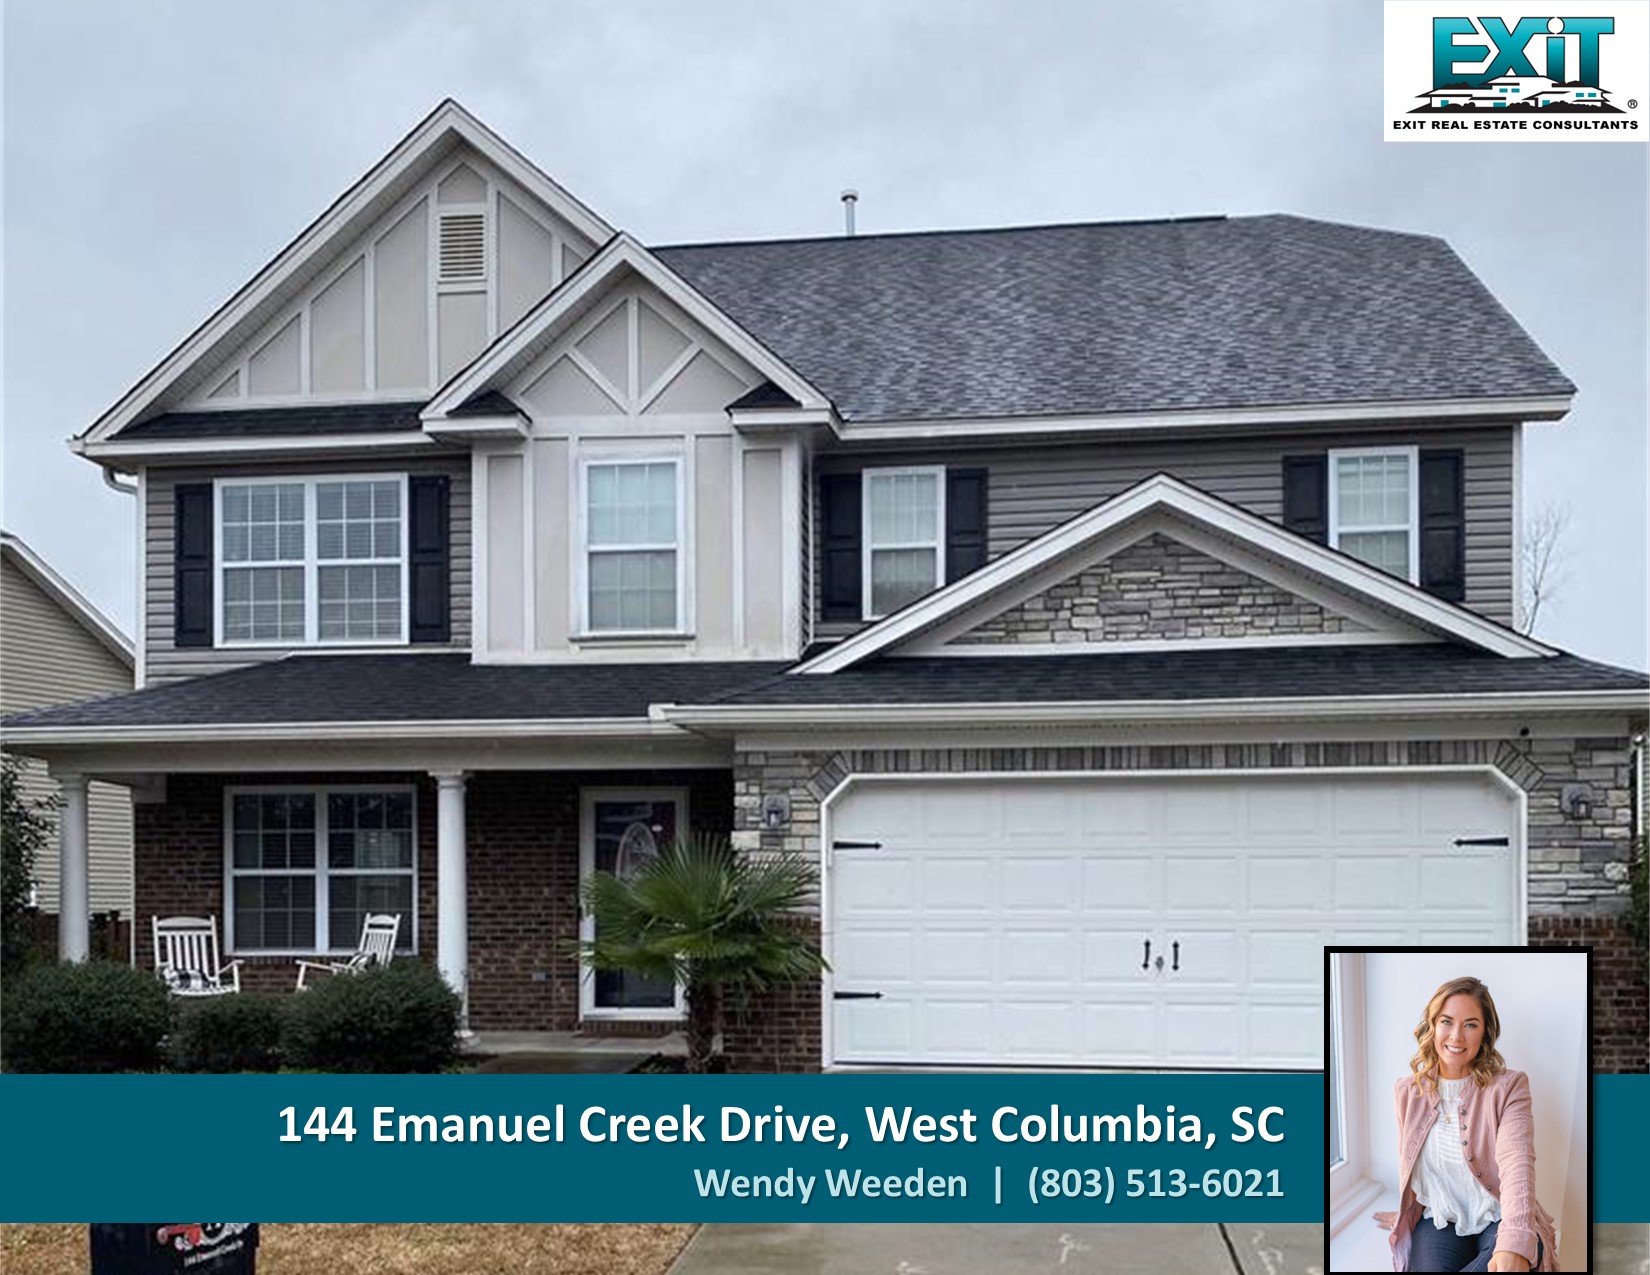 Just listed in Emanuel Creek